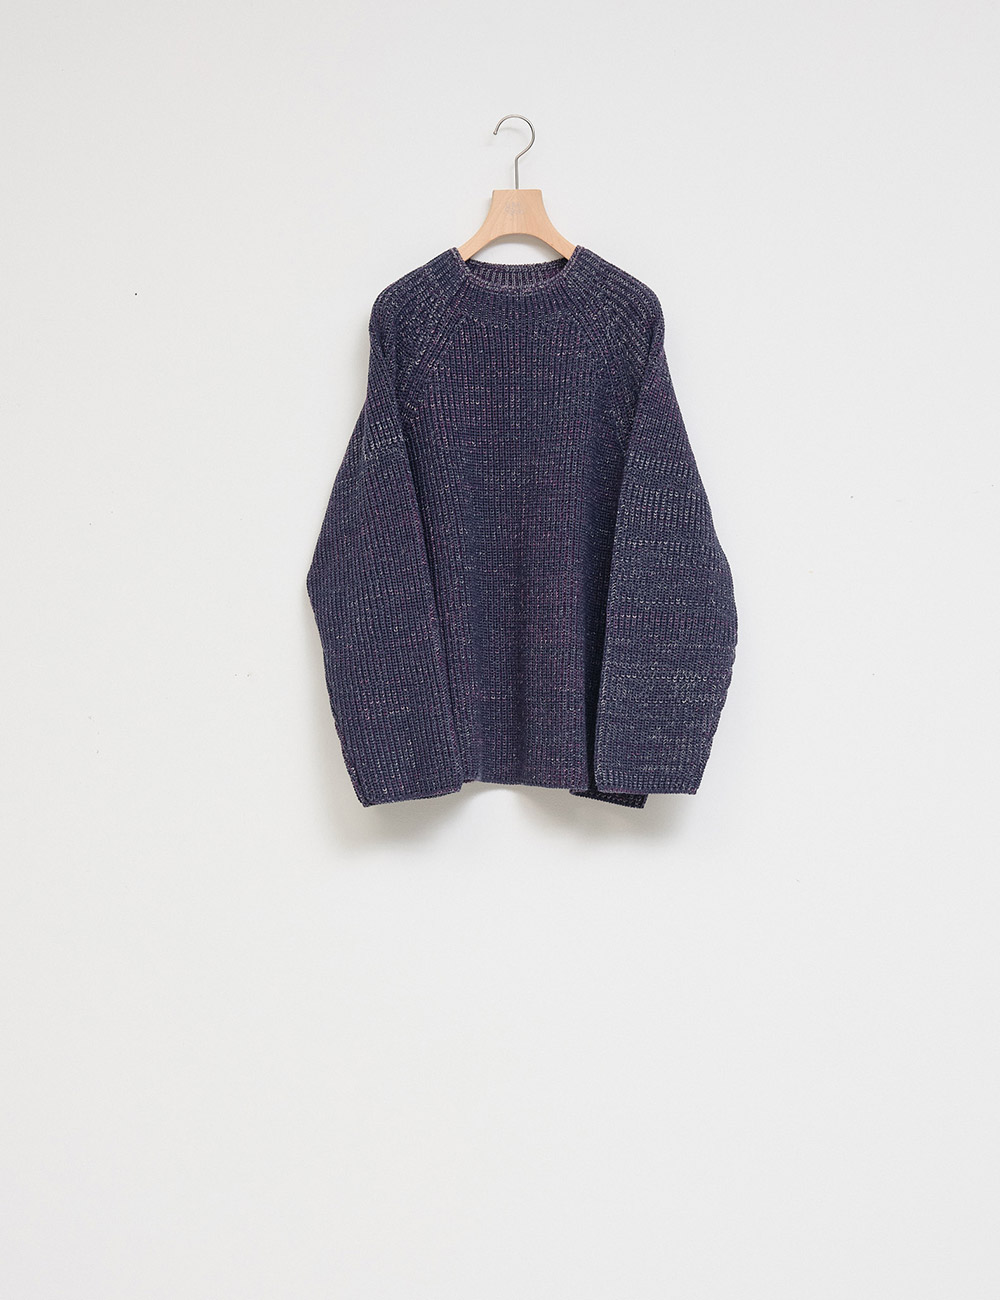 Over Knit (Navy Acrylic Wool)